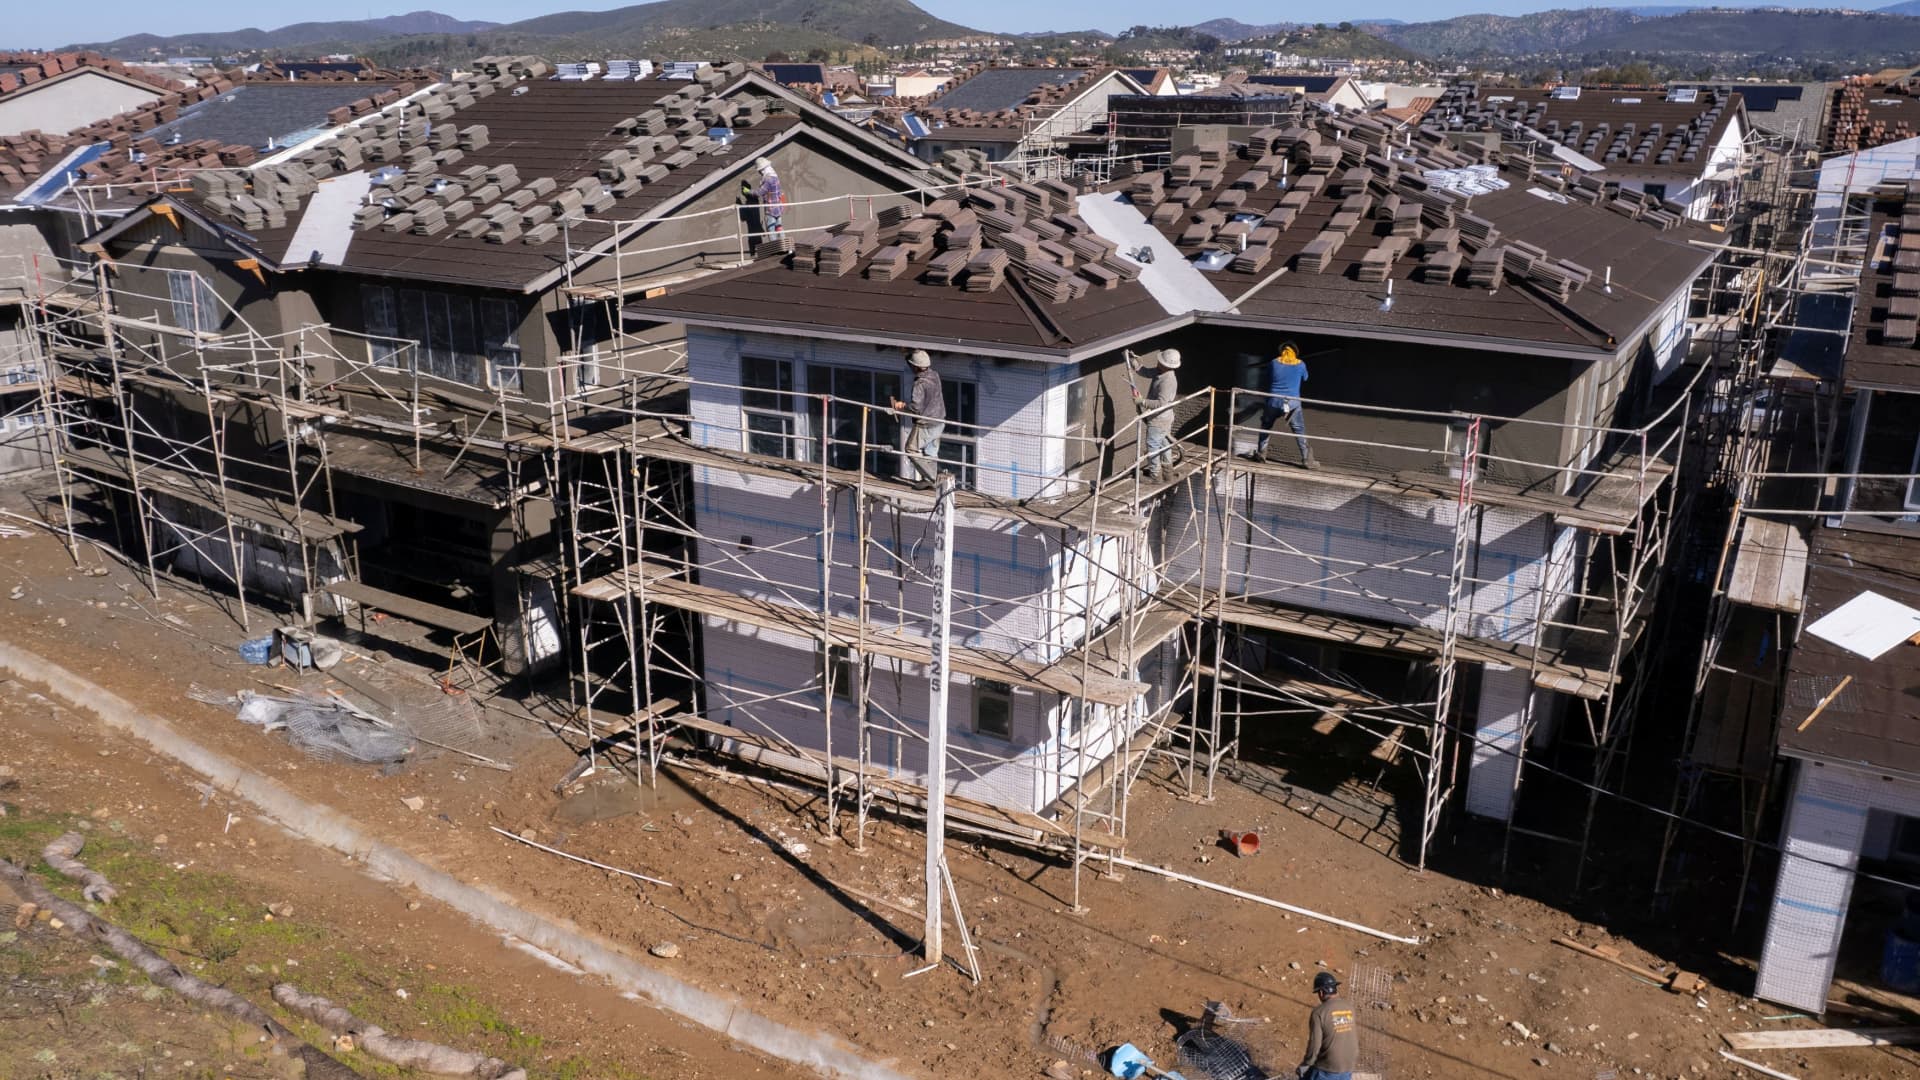 Homebuilders say demand is rising, but they’re concerned about banking fallout